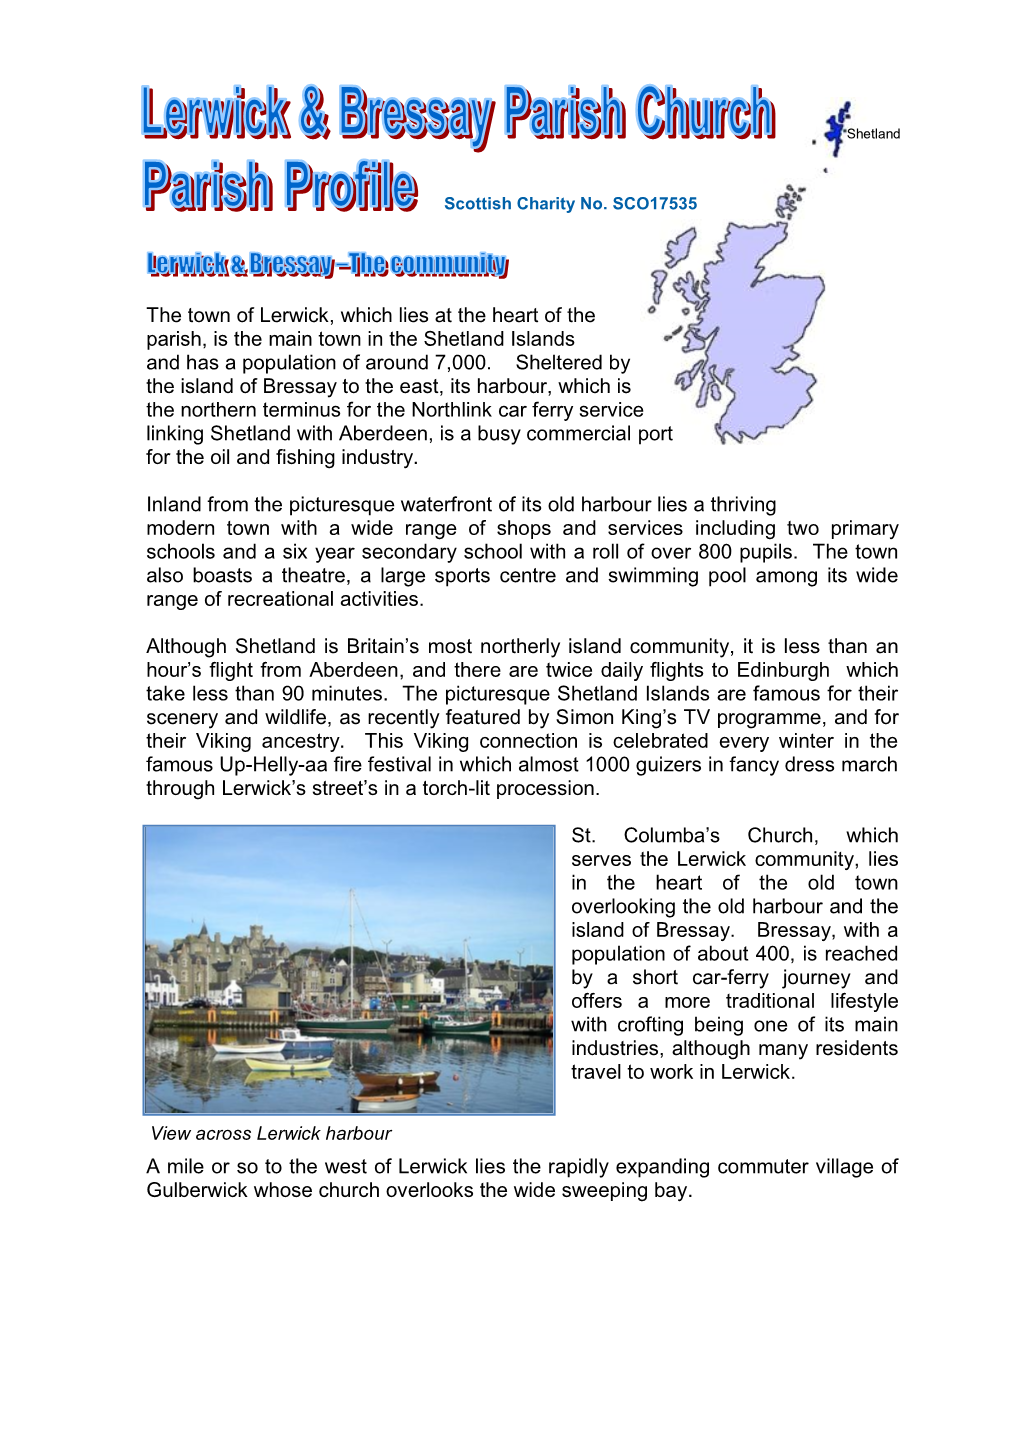 The Parish of Lerwick & Bressay Dates from a Formal Union in 1955